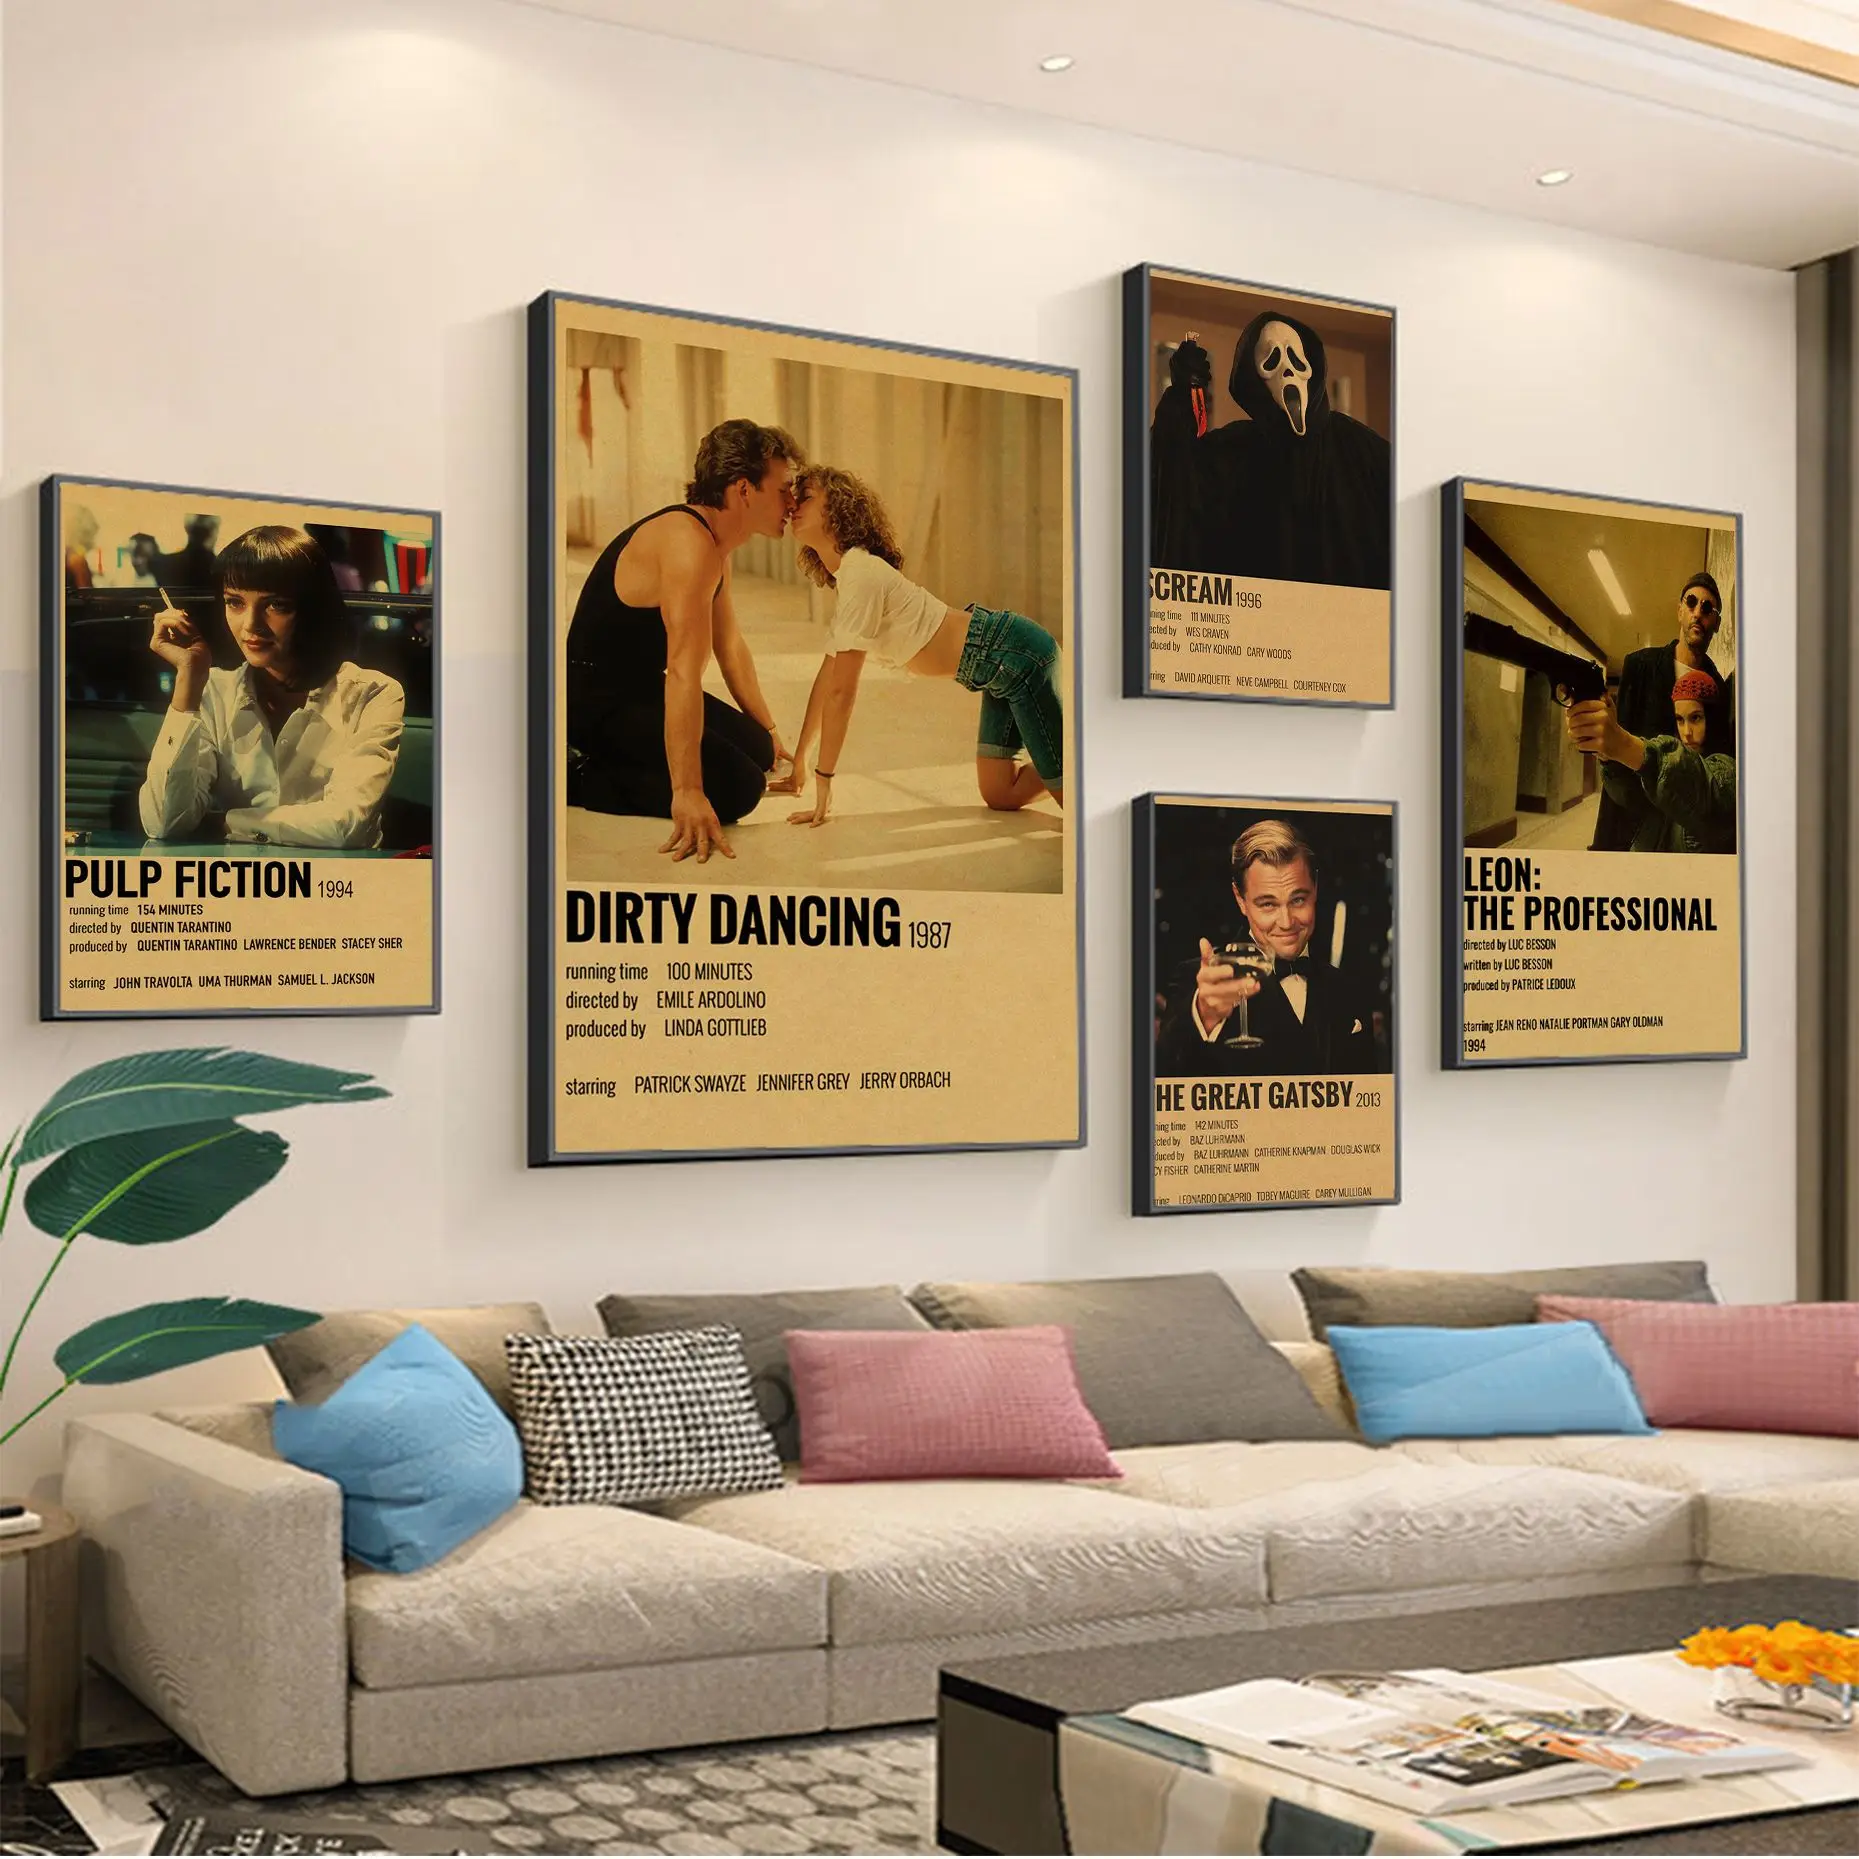 

Hot Movie Vintage Posters Call Me By Your Name /Pulp Fiction Kraft Paper Sticker DIY Room Bar Cafe Decor Gift Art Wall Paintings